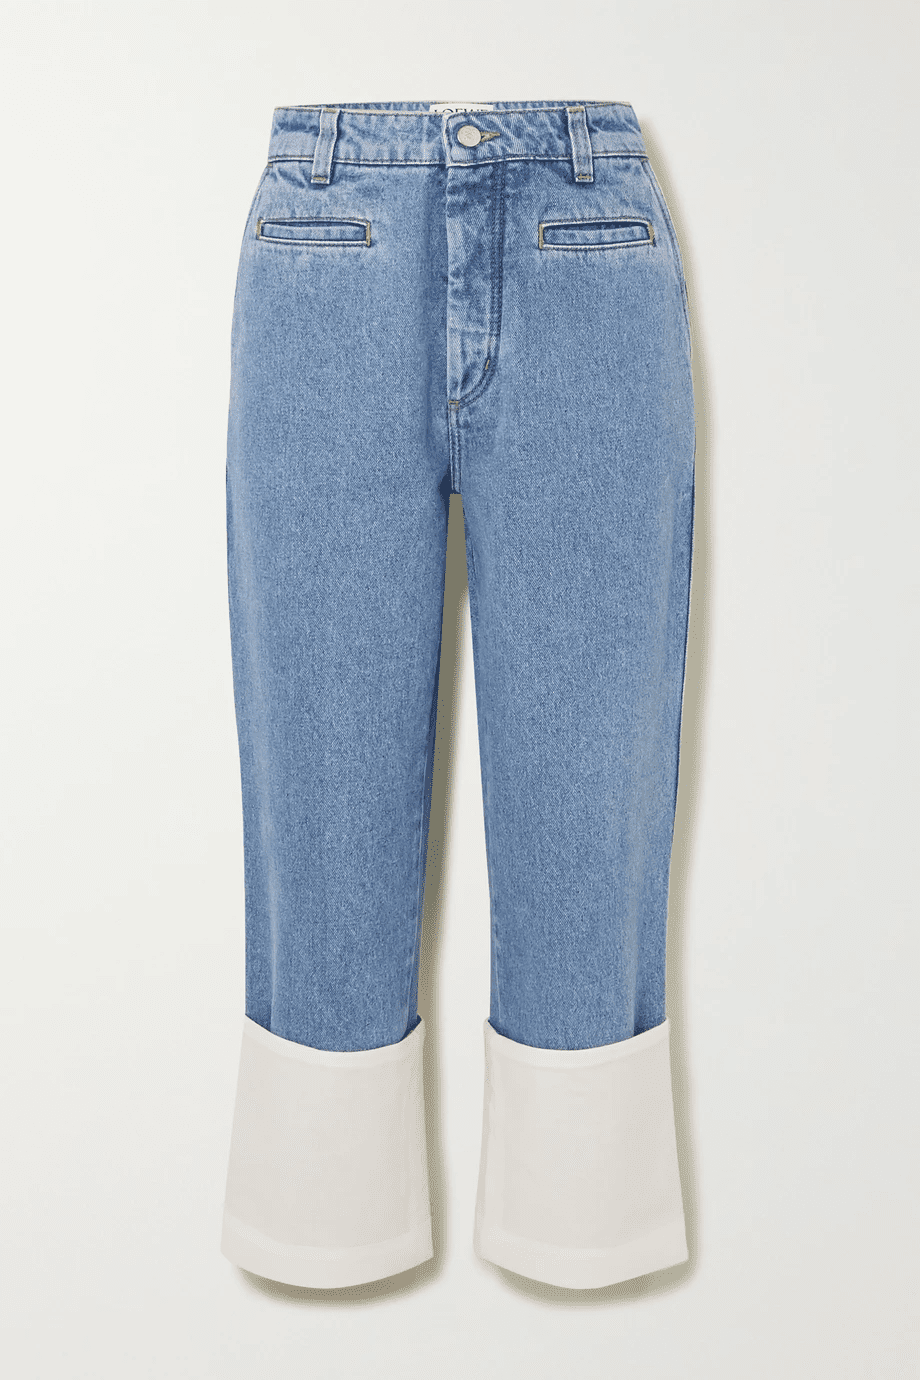 Stylists Jeans Trends